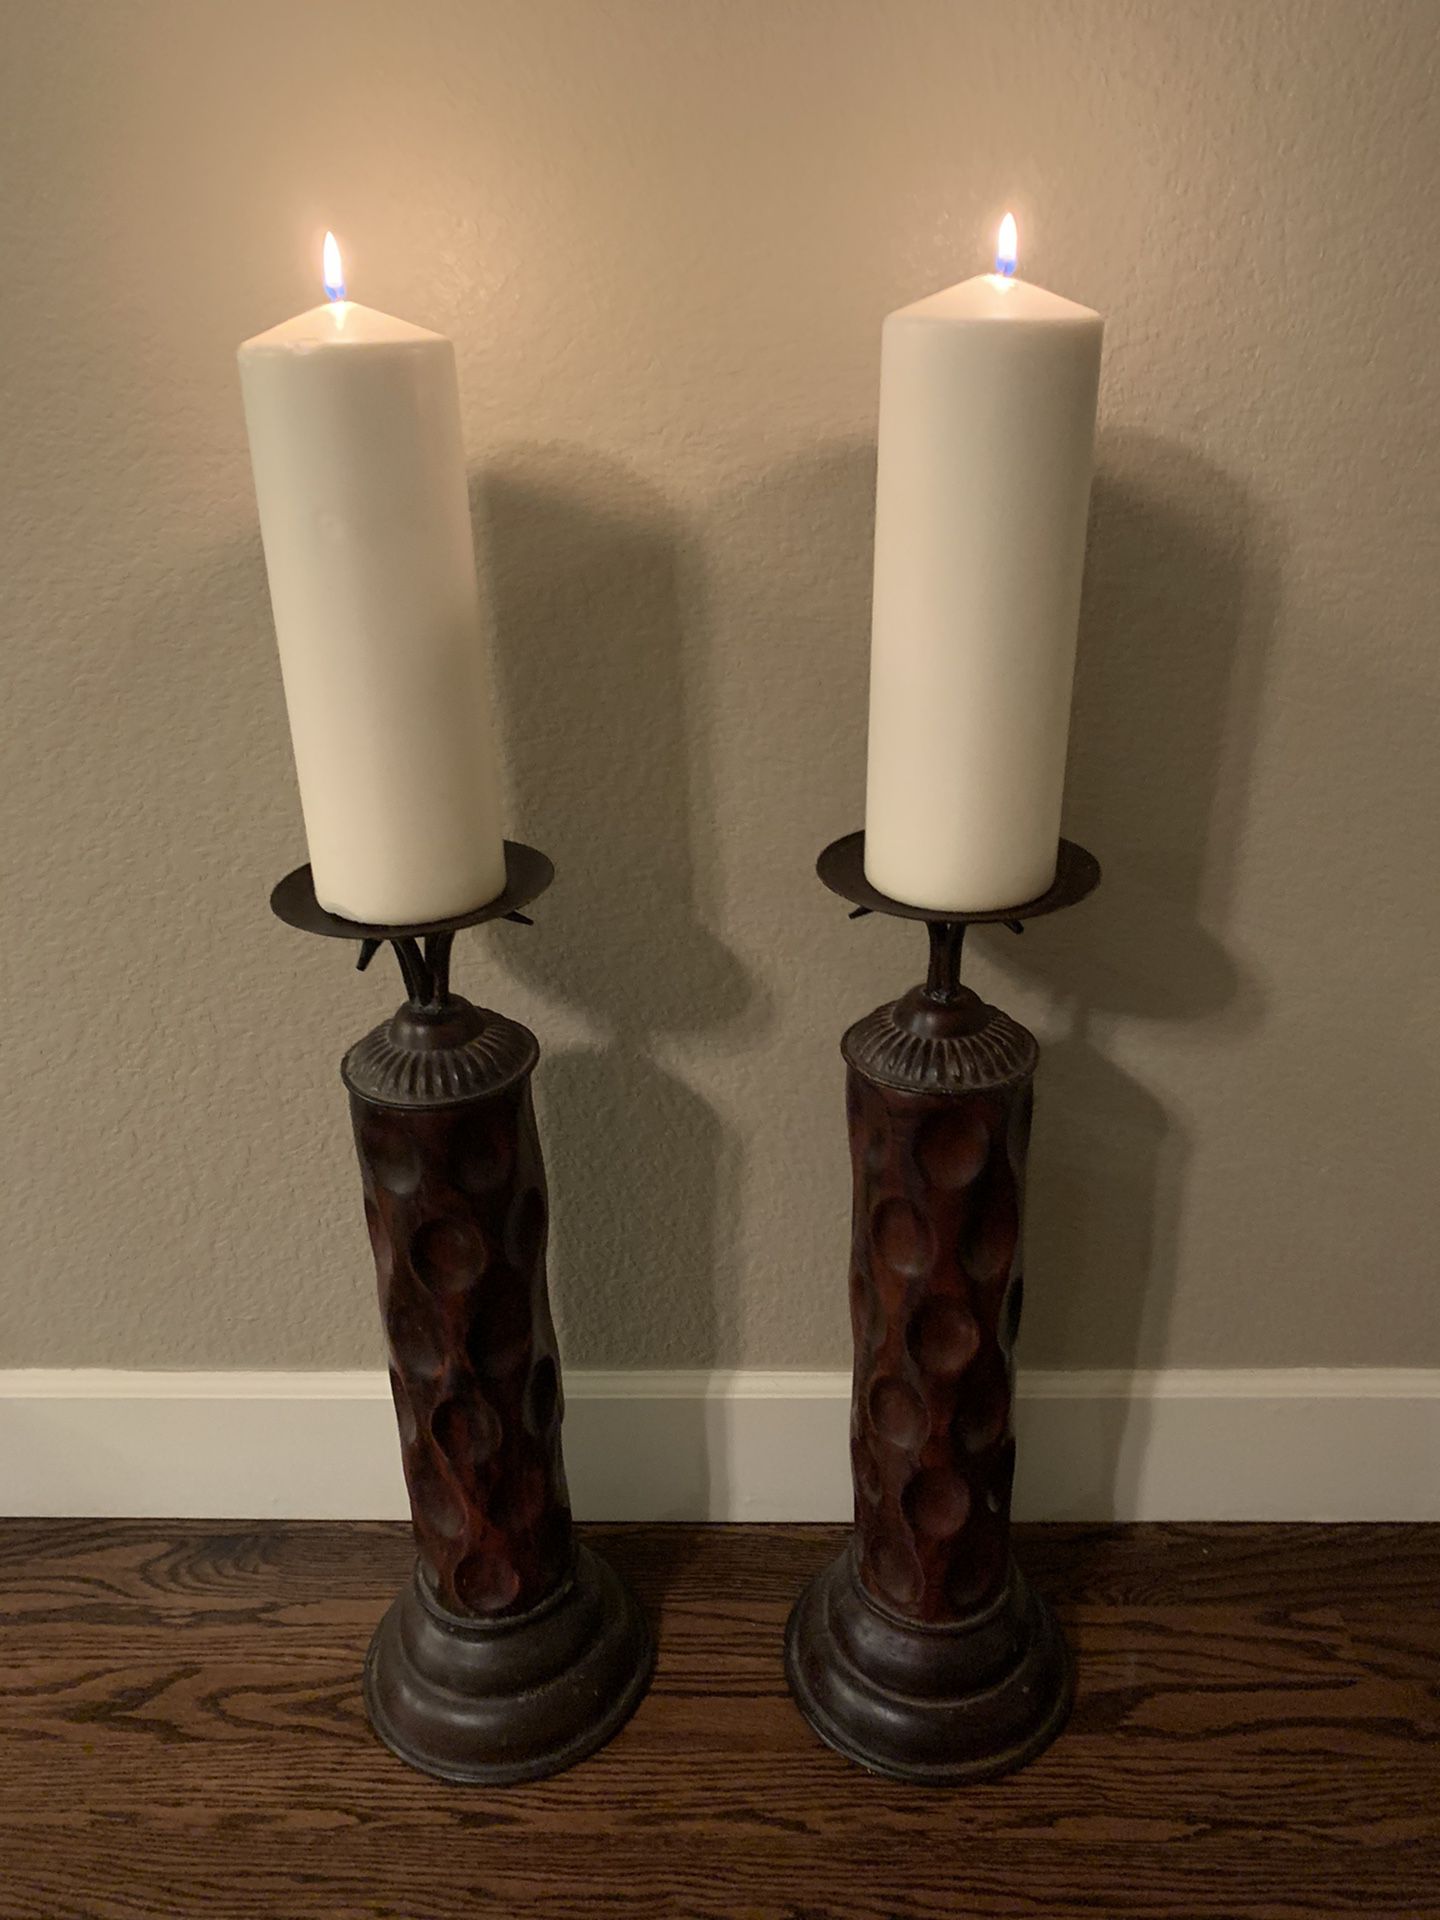 Pair of bronze candle holders for large pillar candles